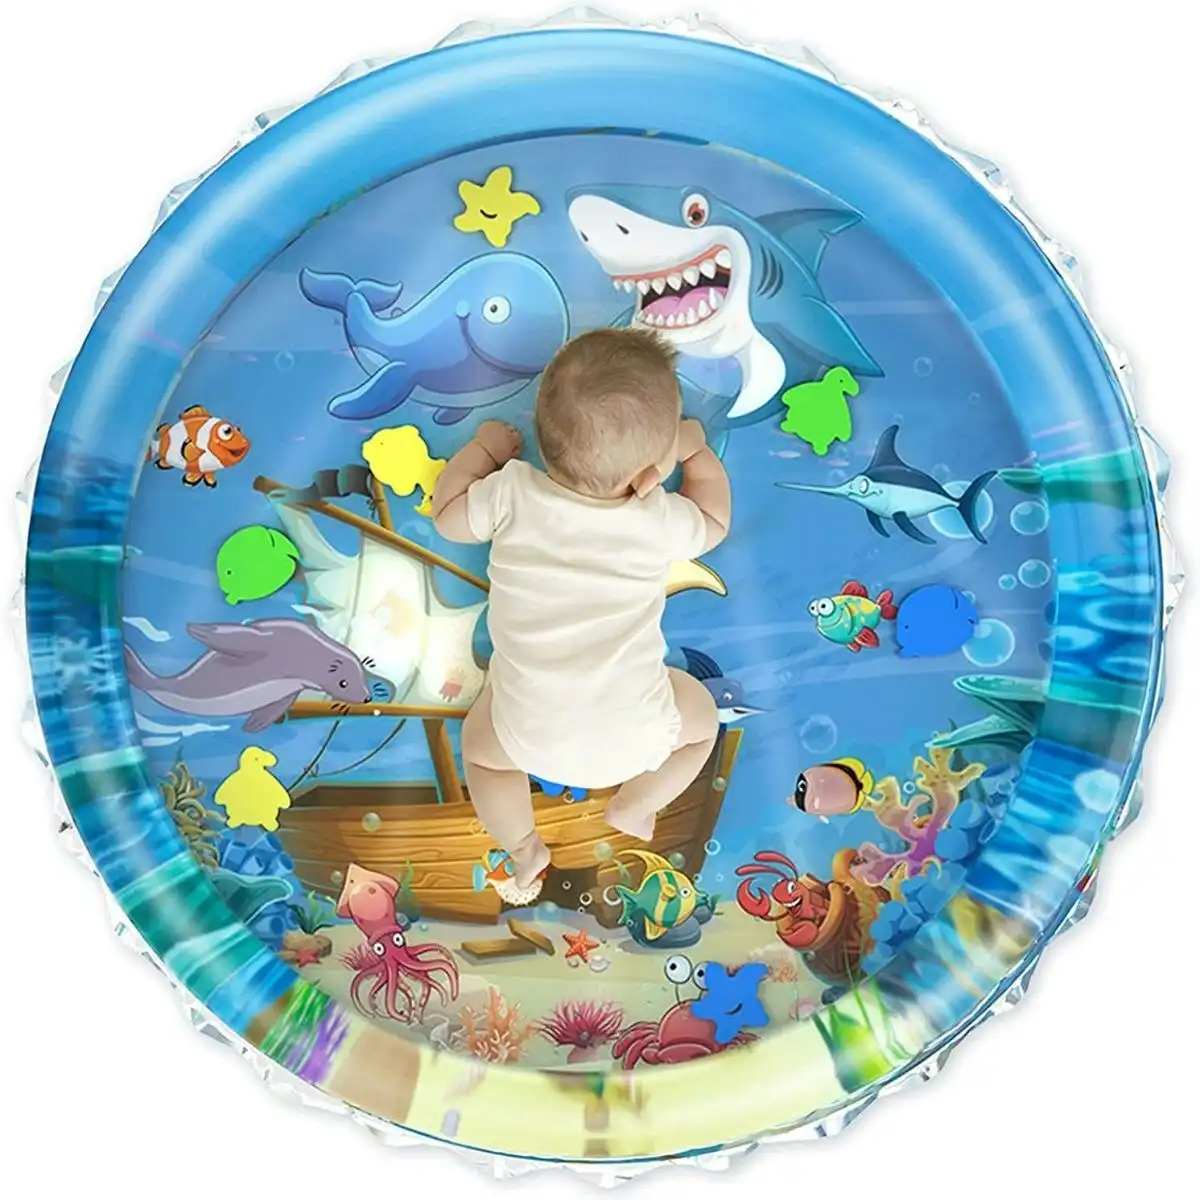 Toddly SplashJourney XL Inflatable Tummy Time Water Mat Sensory Mat for Baby